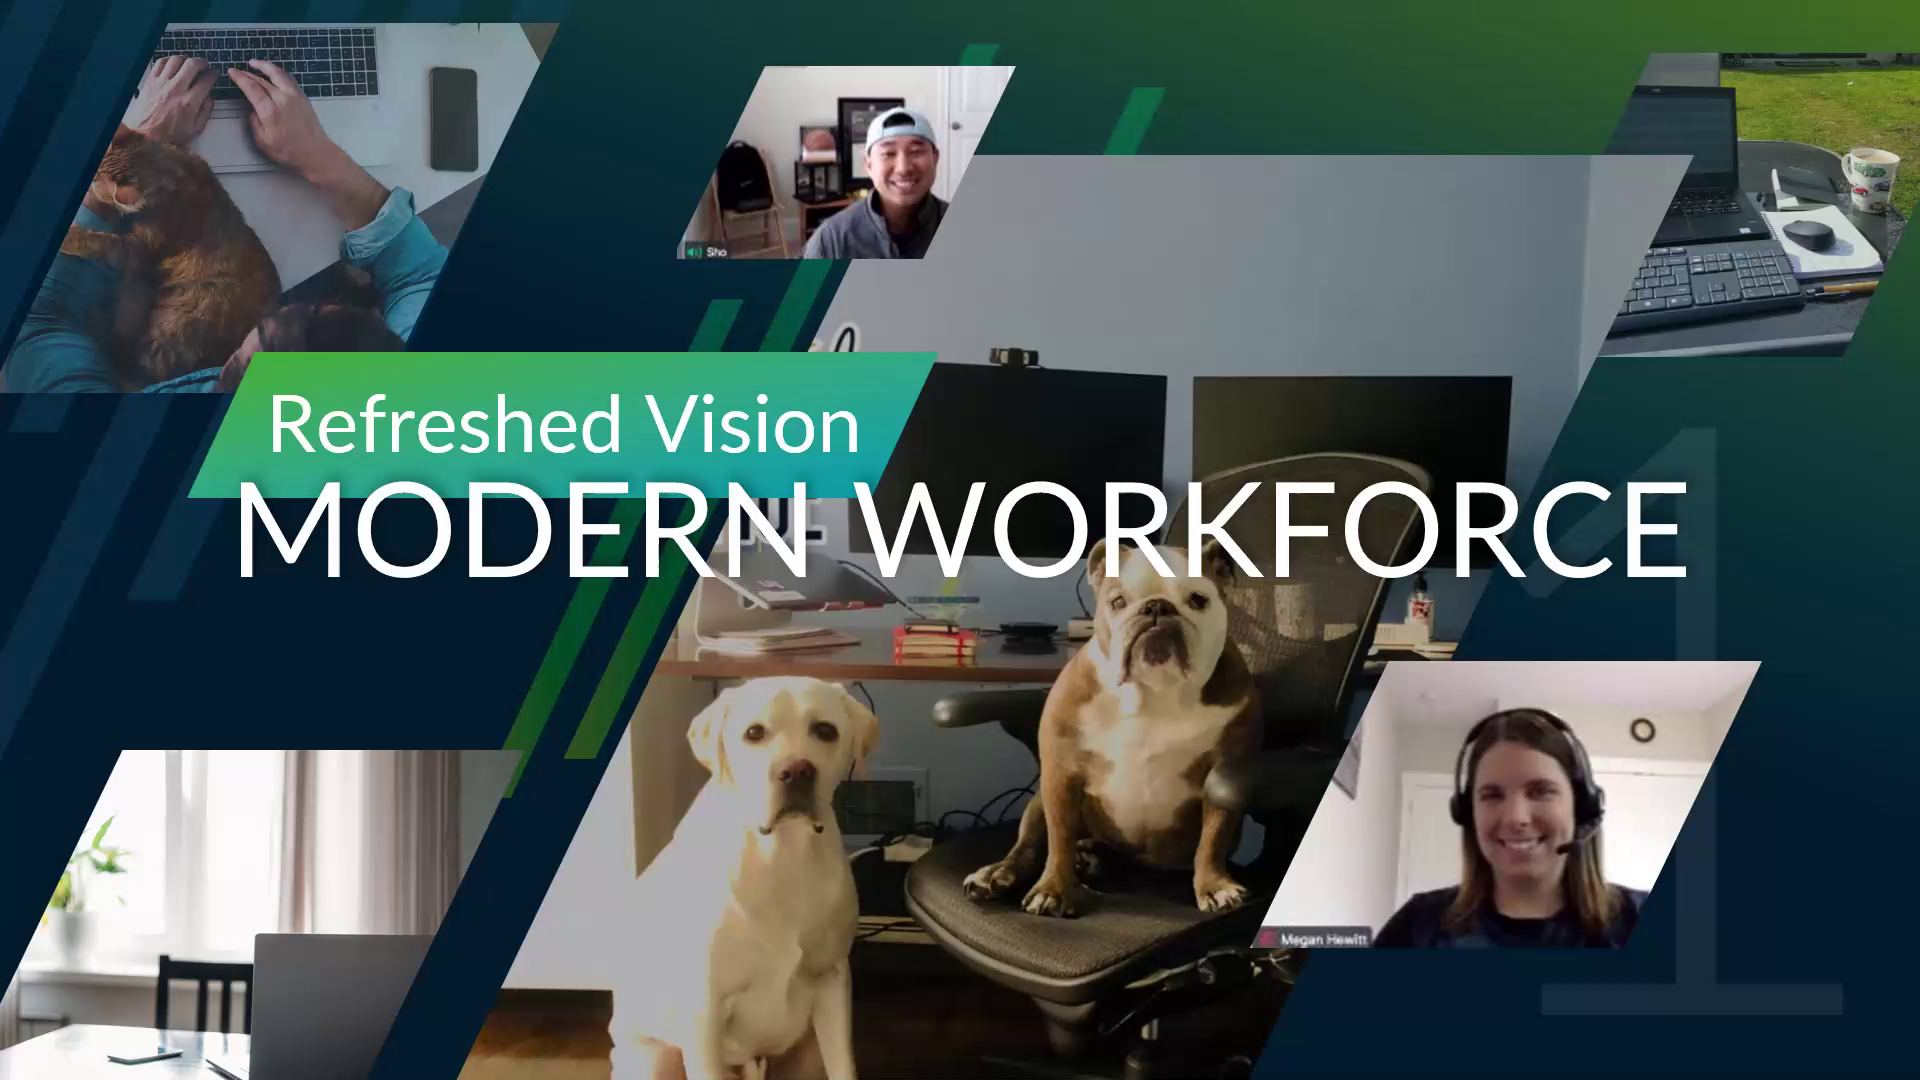 Powerpoint slide that reads "Refreshed Vision - Modern Workforce" with a collage of images of employees working remotely.